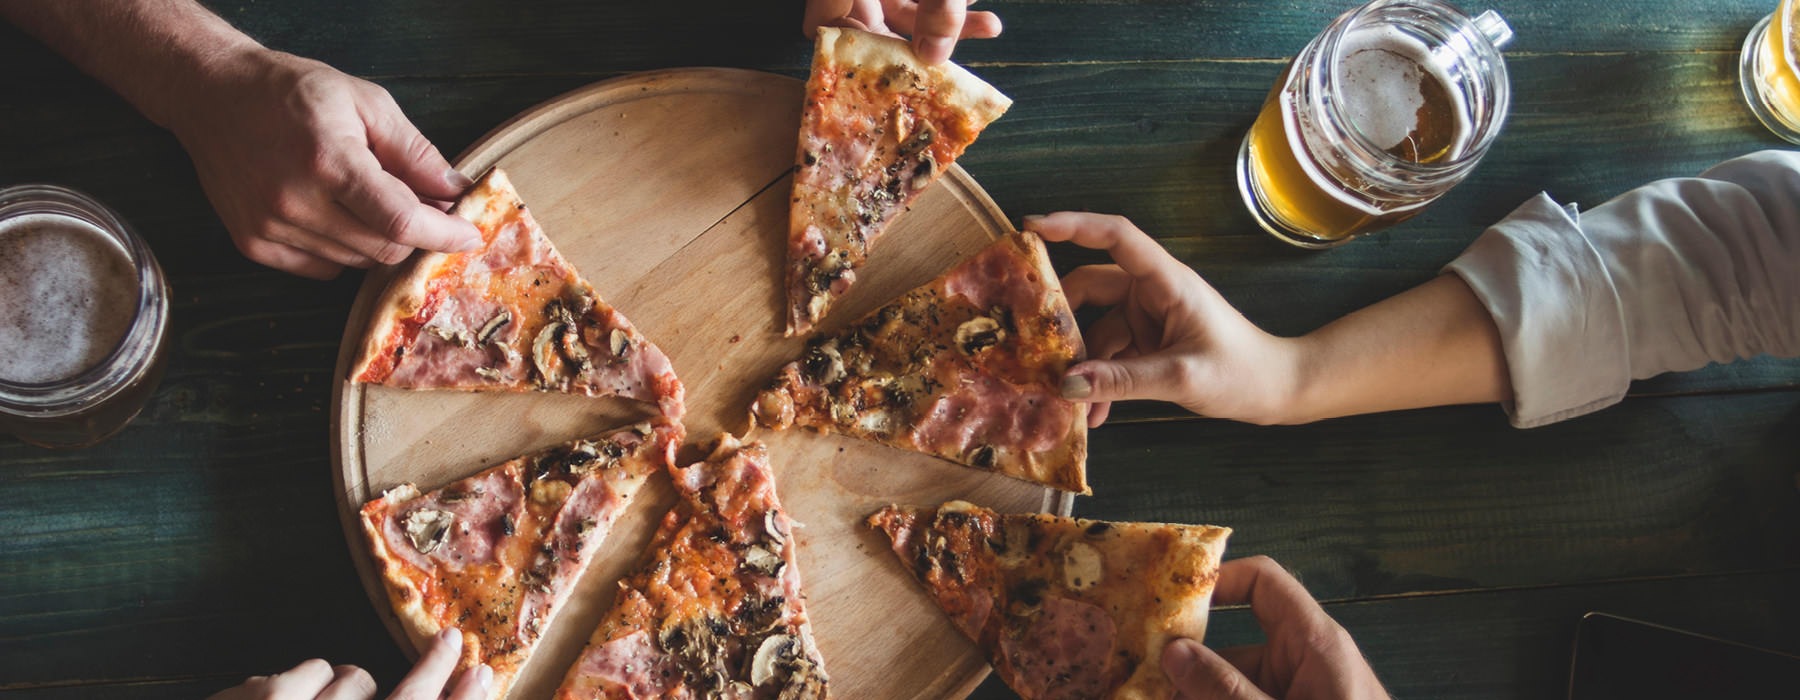 hands reach in for slices for pizza in local restaurant